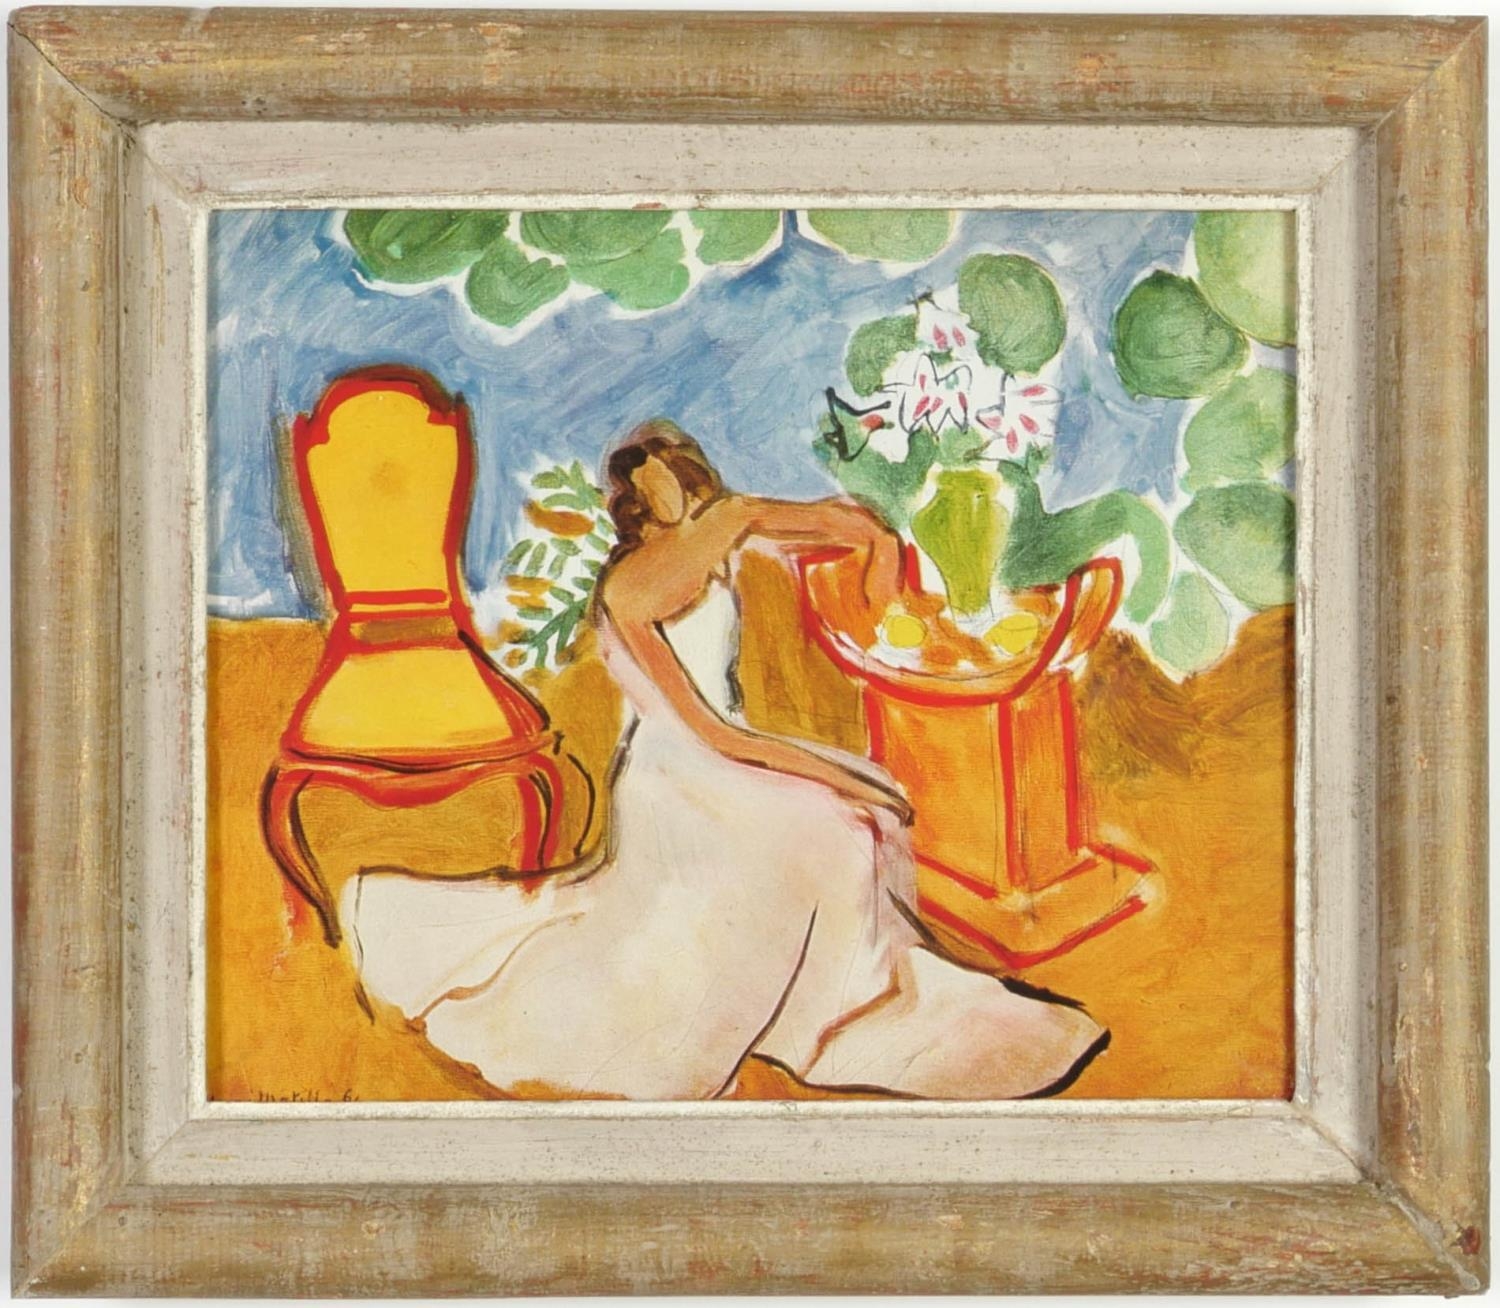 Henri Matisse, Femme Assise, Off set lithograph – signed in the plate, Vintage French frame, 21.5